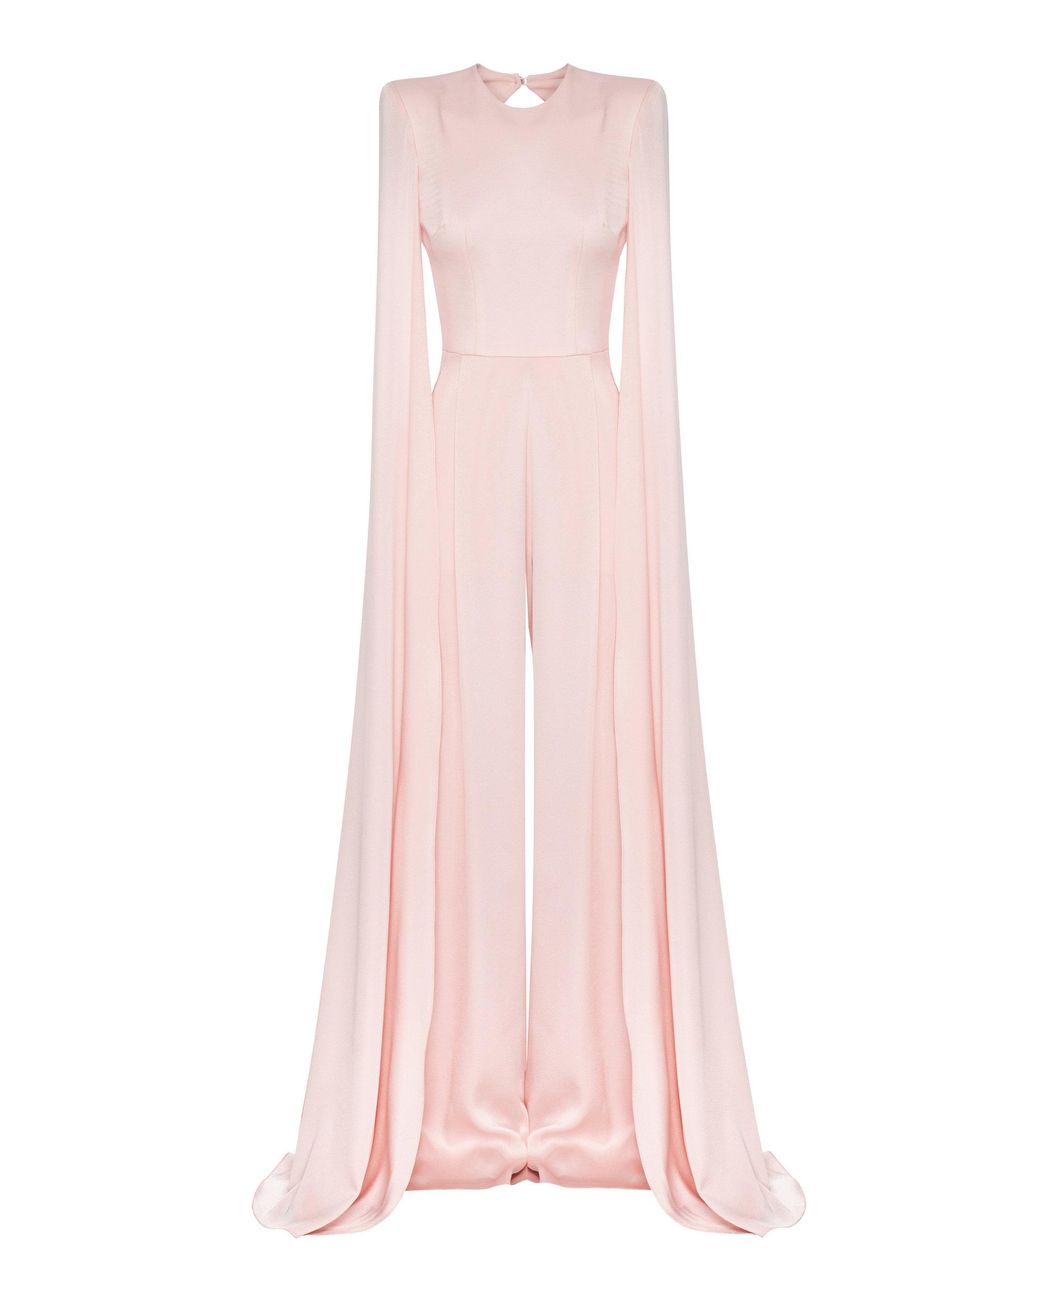 Alex Perry Halston Cape Overlay Satin Jumpsuit in Pink | Lyst